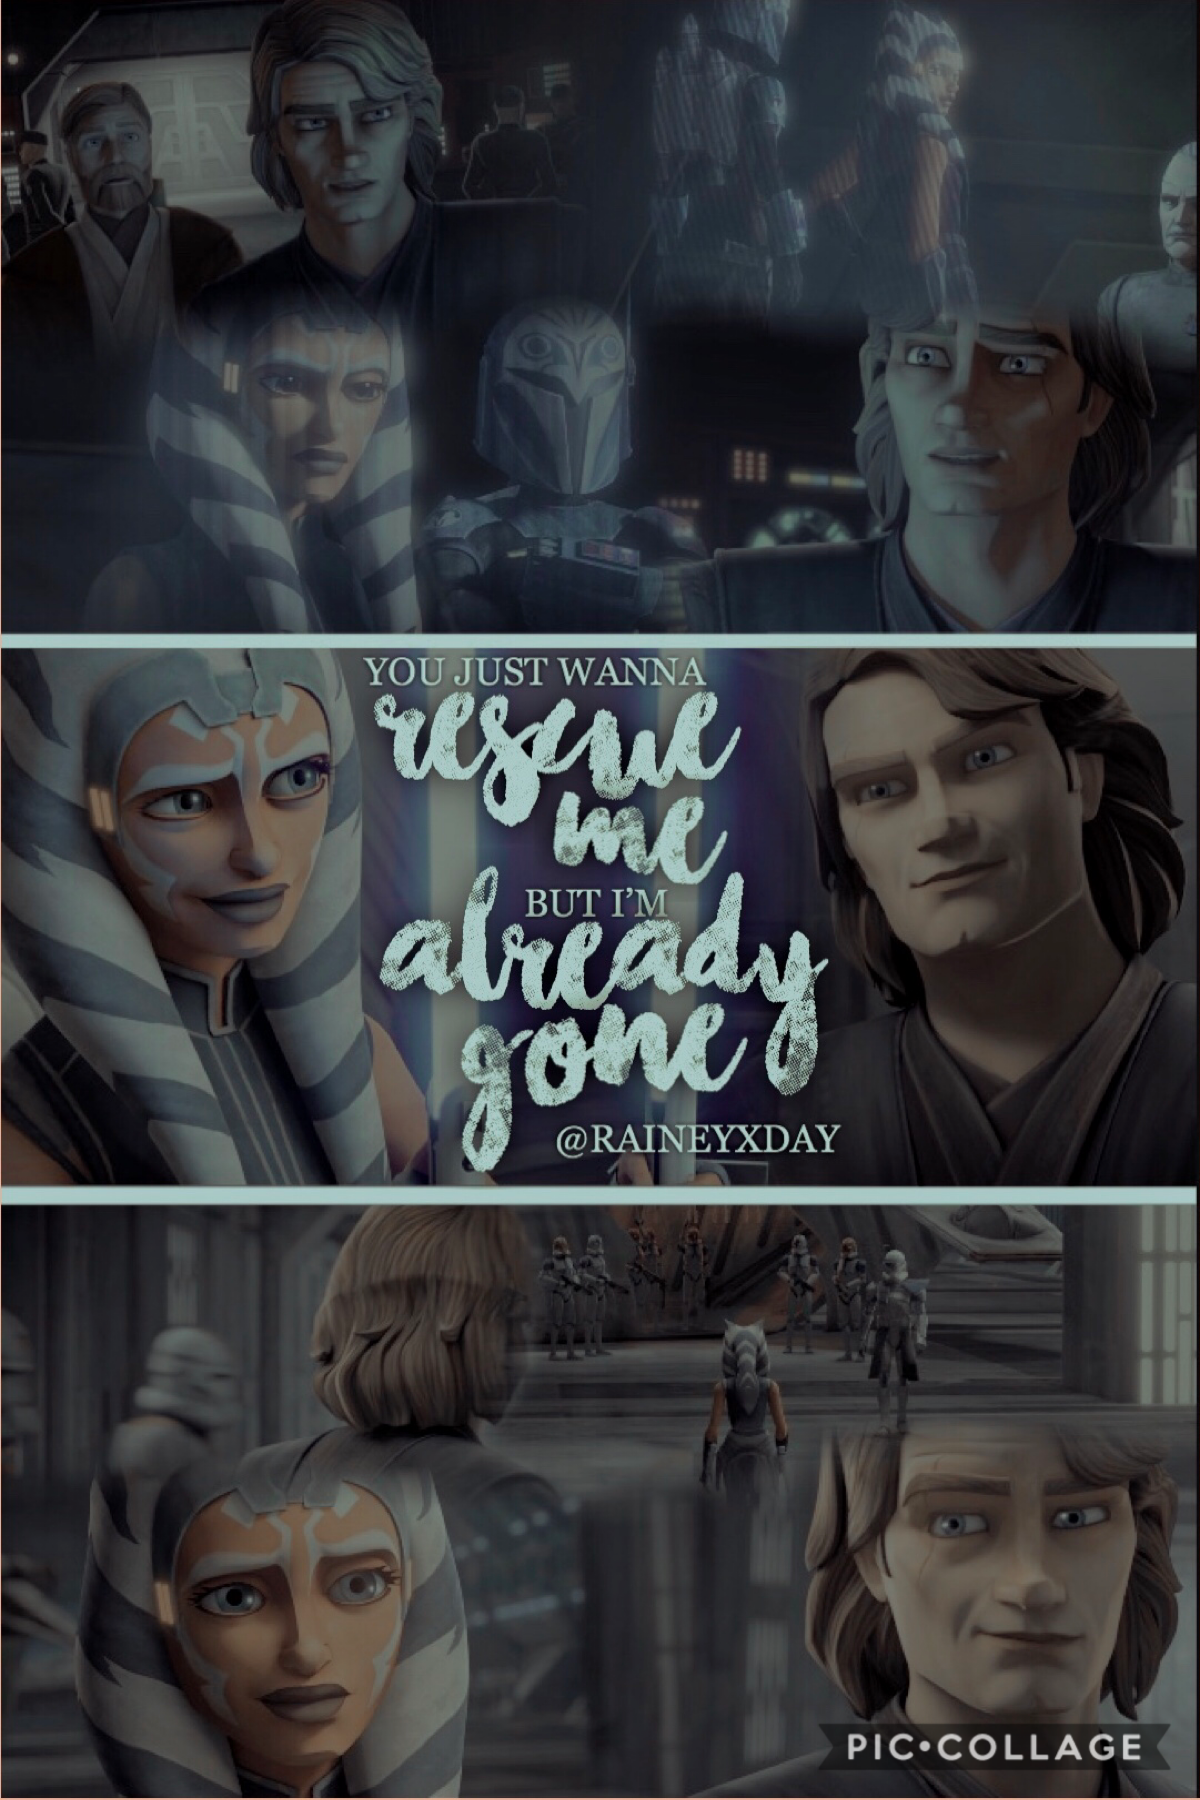 new BLEND edit (tap)

Info: Ahsoka & Anakin (clone wars)


Check me out on PicsArt!

@dancingintheraine for complex edits

&

@raineyxday for outline and blend edits


—————————————————————————